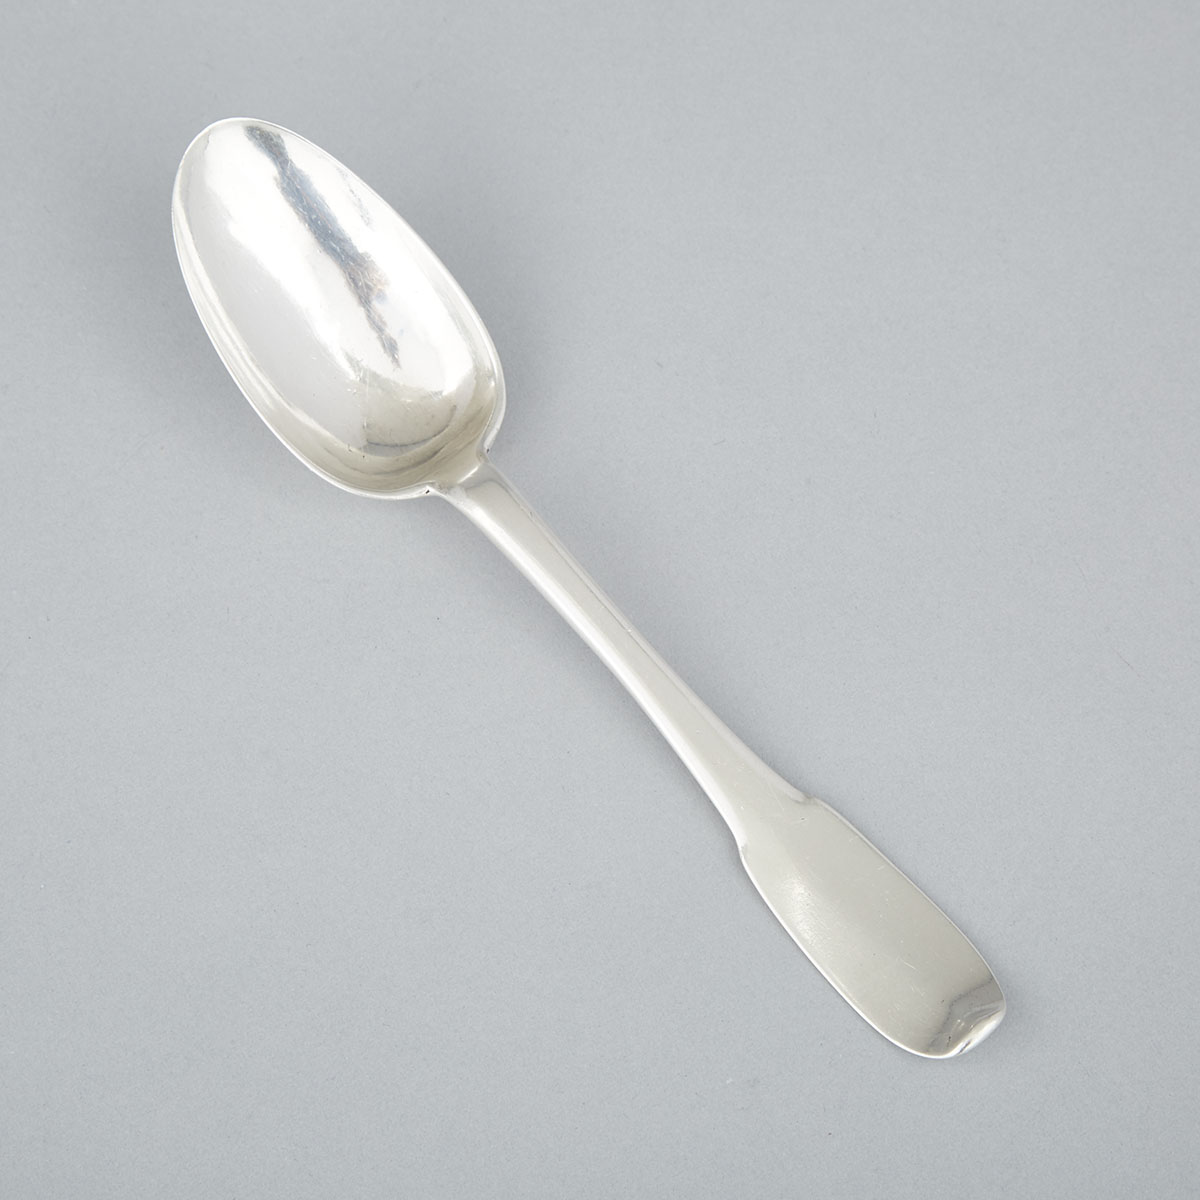 Canadian Silver Table Spoon, maker’s mark FI(?) over R, Quebec City, Que., mid-18th century